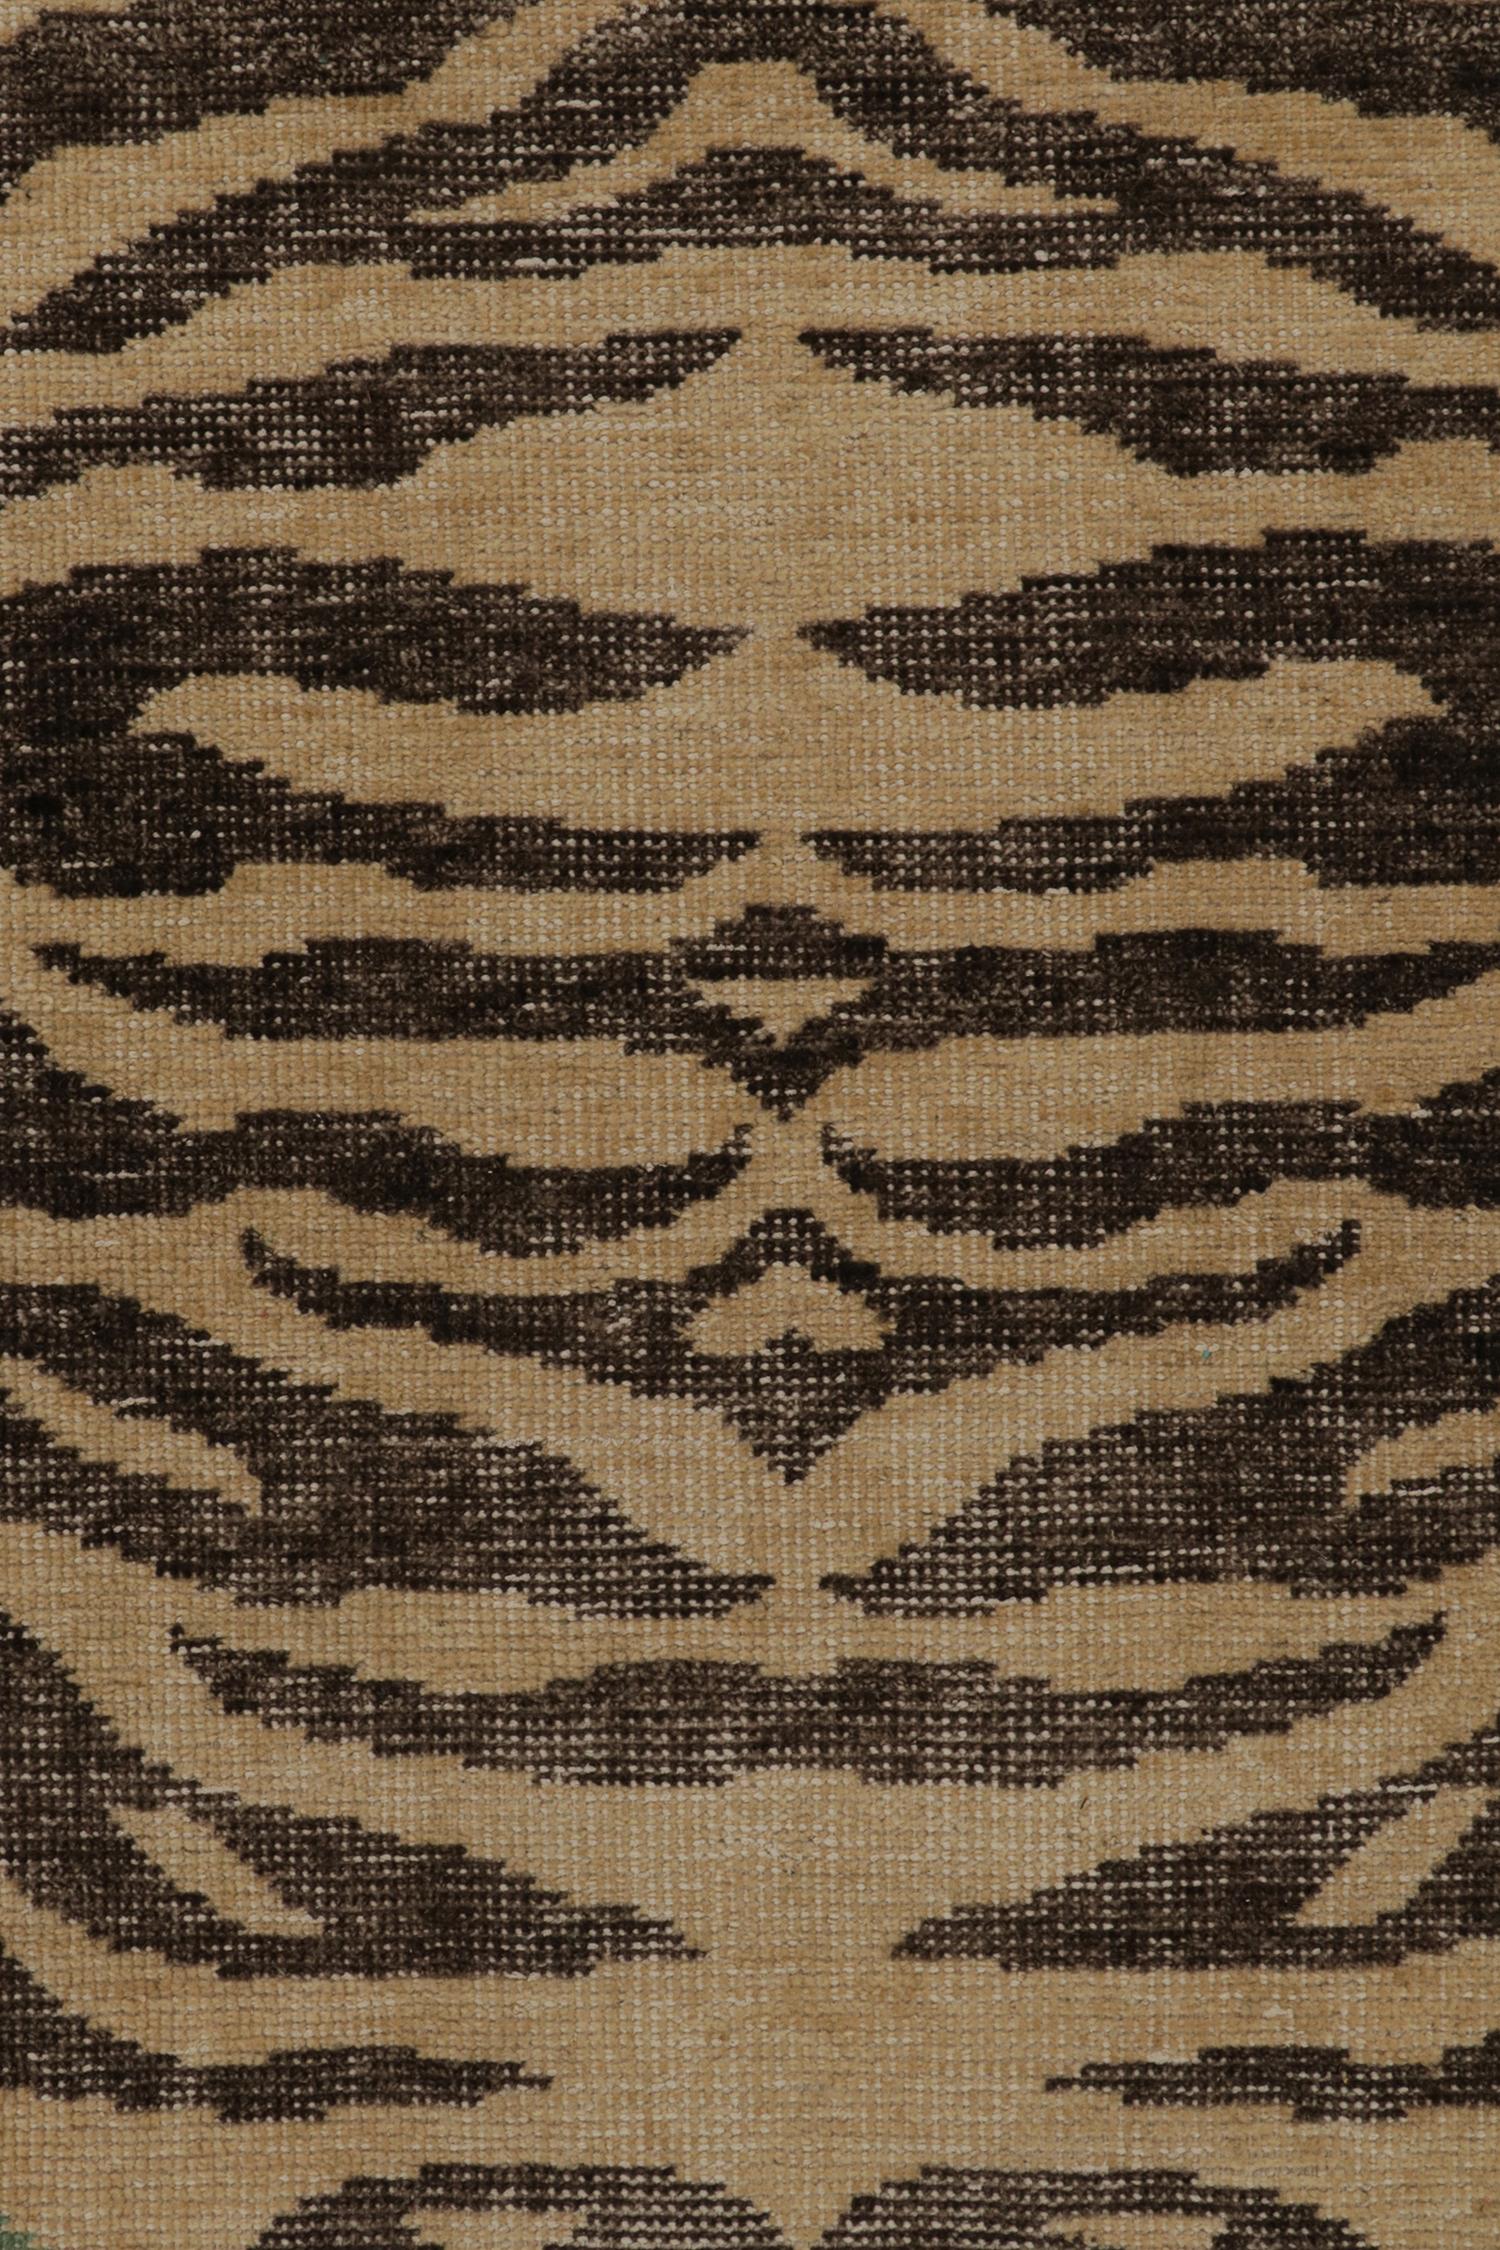 Contemporary Rug & Kilim’s Distressed Tiger Skin Style Rug in Green, Beige & Black Pictorial For Sale